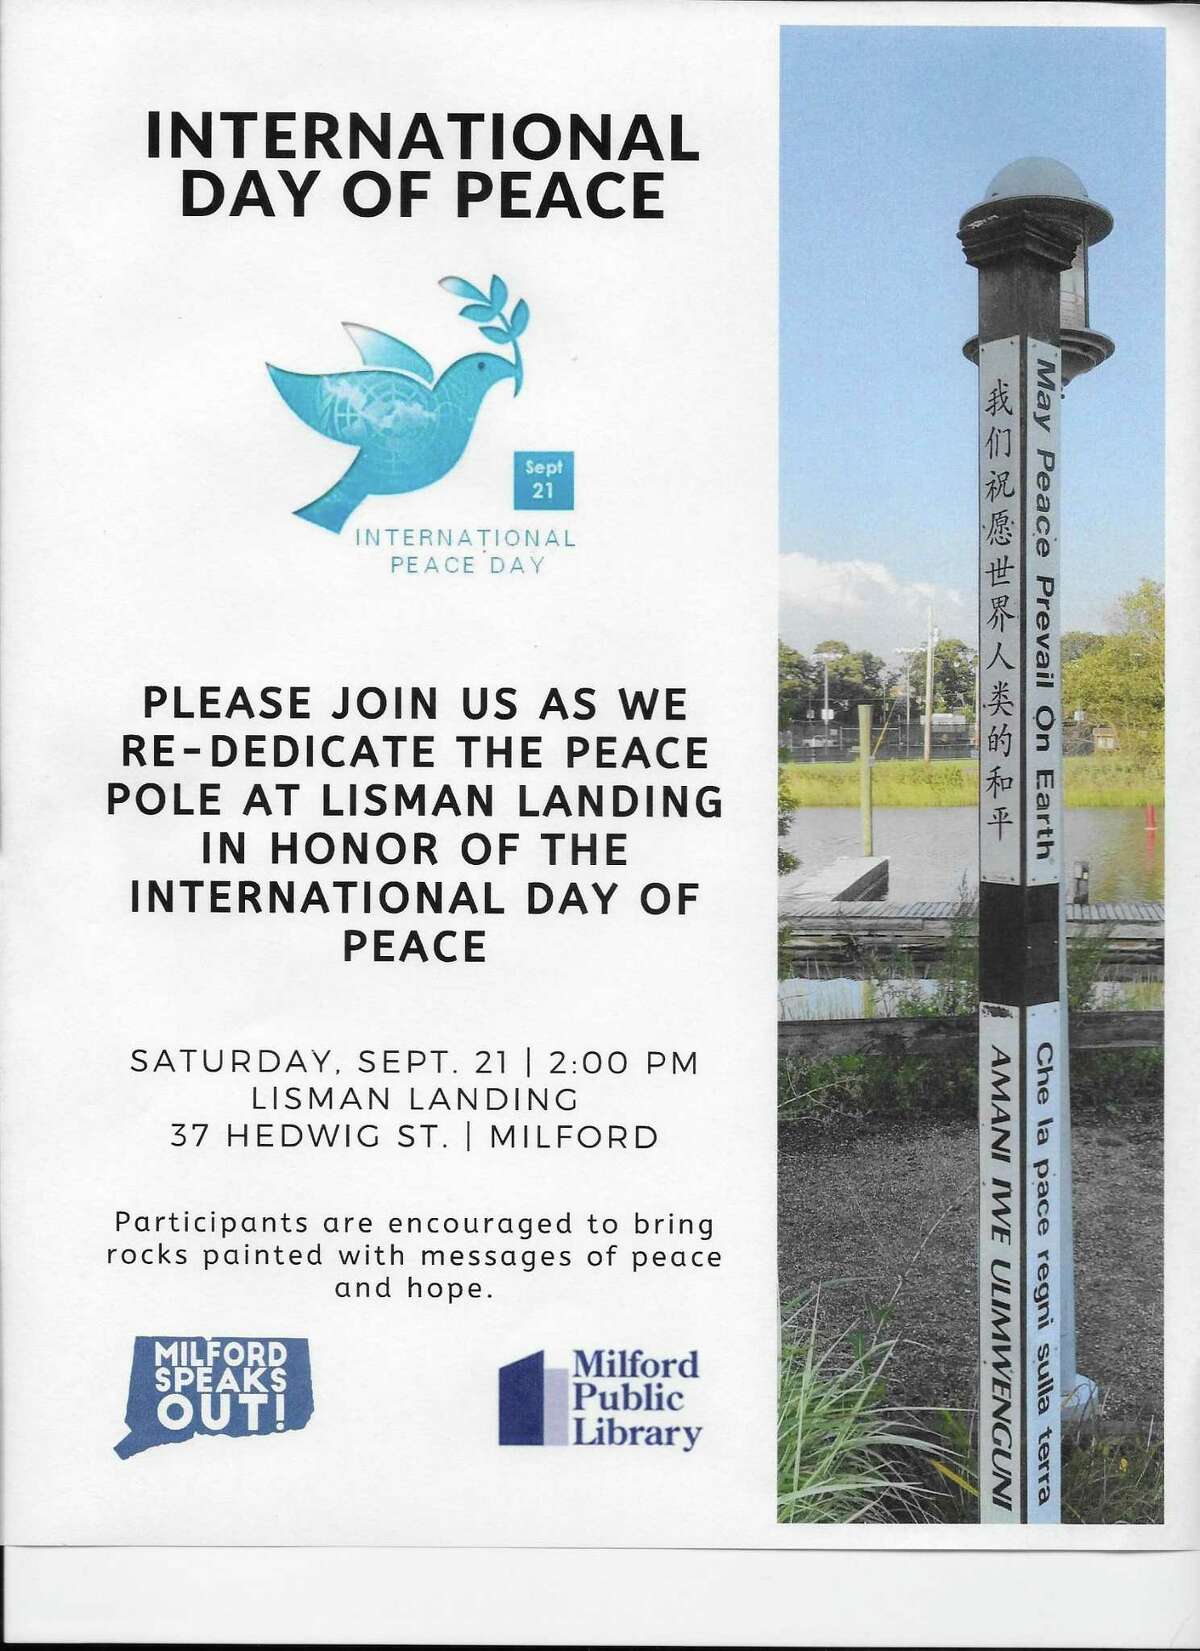 Milford Speaks Out (MSO), in partnership with the Milford Public Library, will host a World Peace Day event on Saturday, Sept. 21